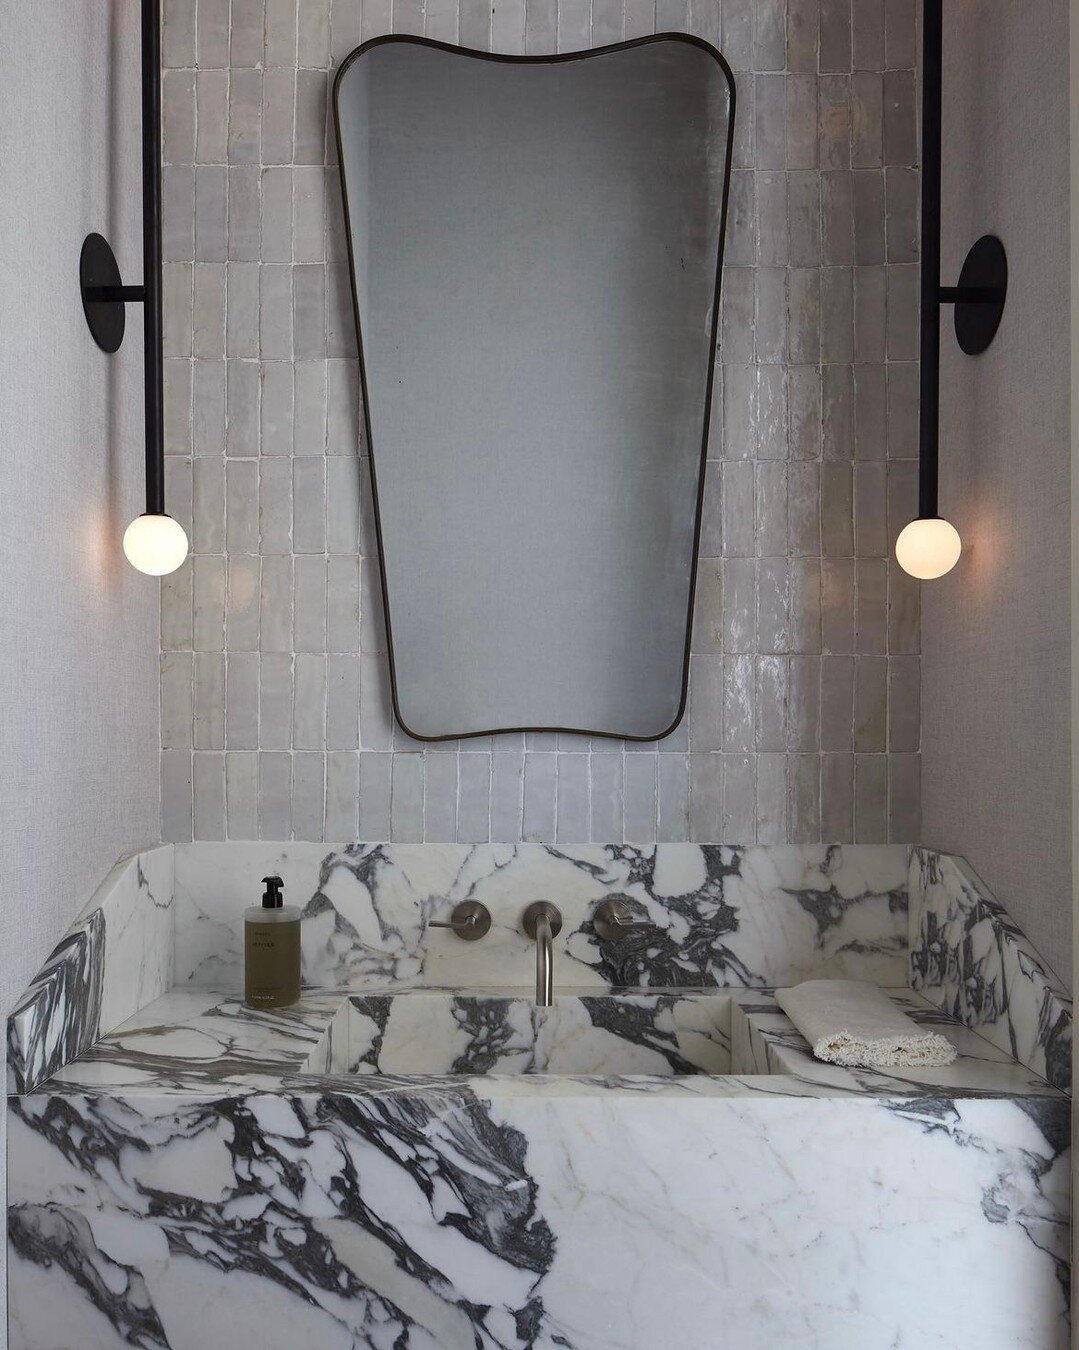 Design Inspiration | Dive into design inspiration with this stunning marble bathroom from the private residence of fashion designer Joseph Altuzarra and Seth Weissman, as featured in the prestigious AD magazine! 

Interior by @joshgreenedesign 
Marbl